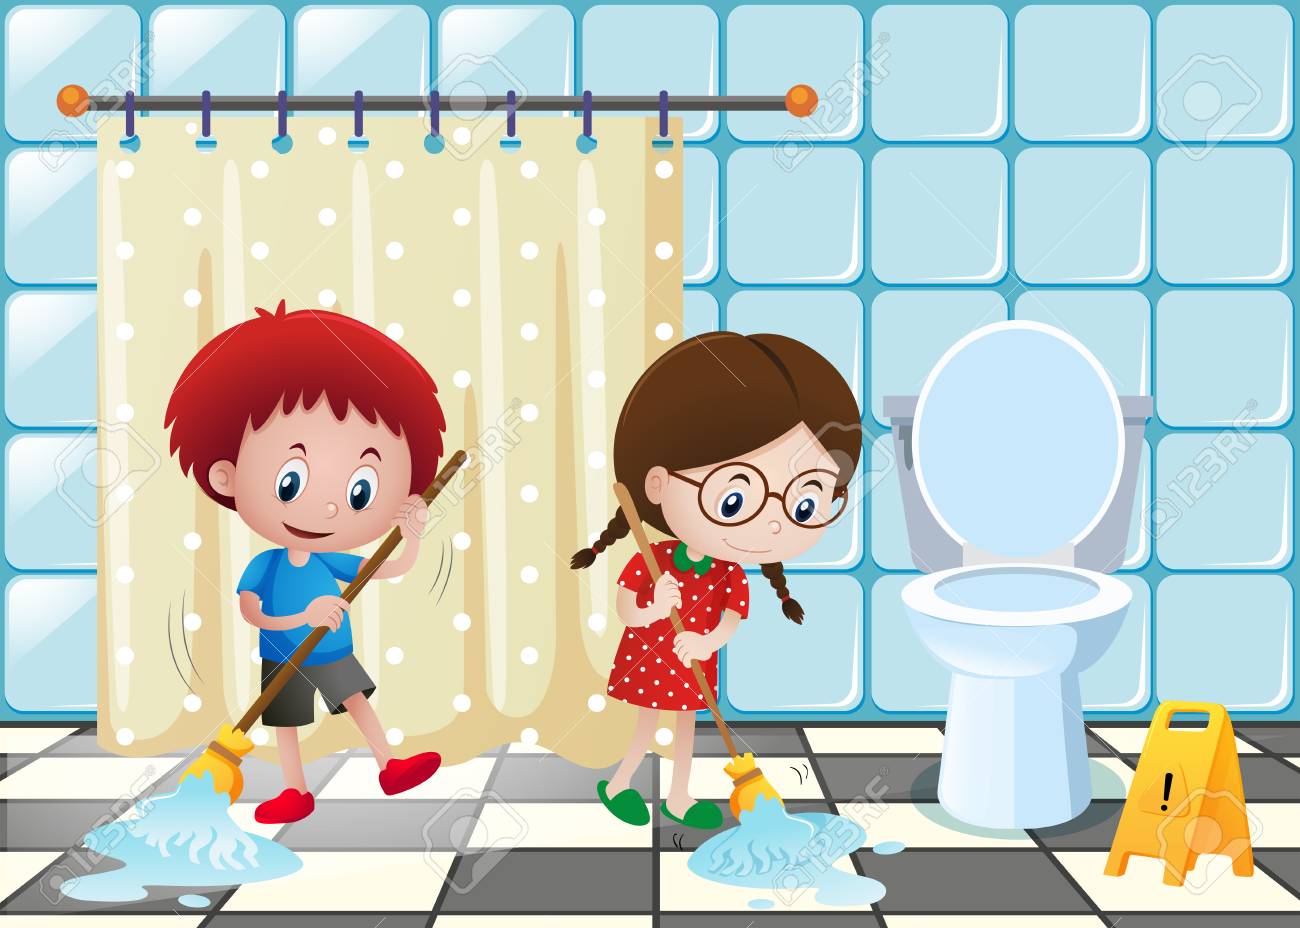 Boy and girl cleaning the bathroom illustration.